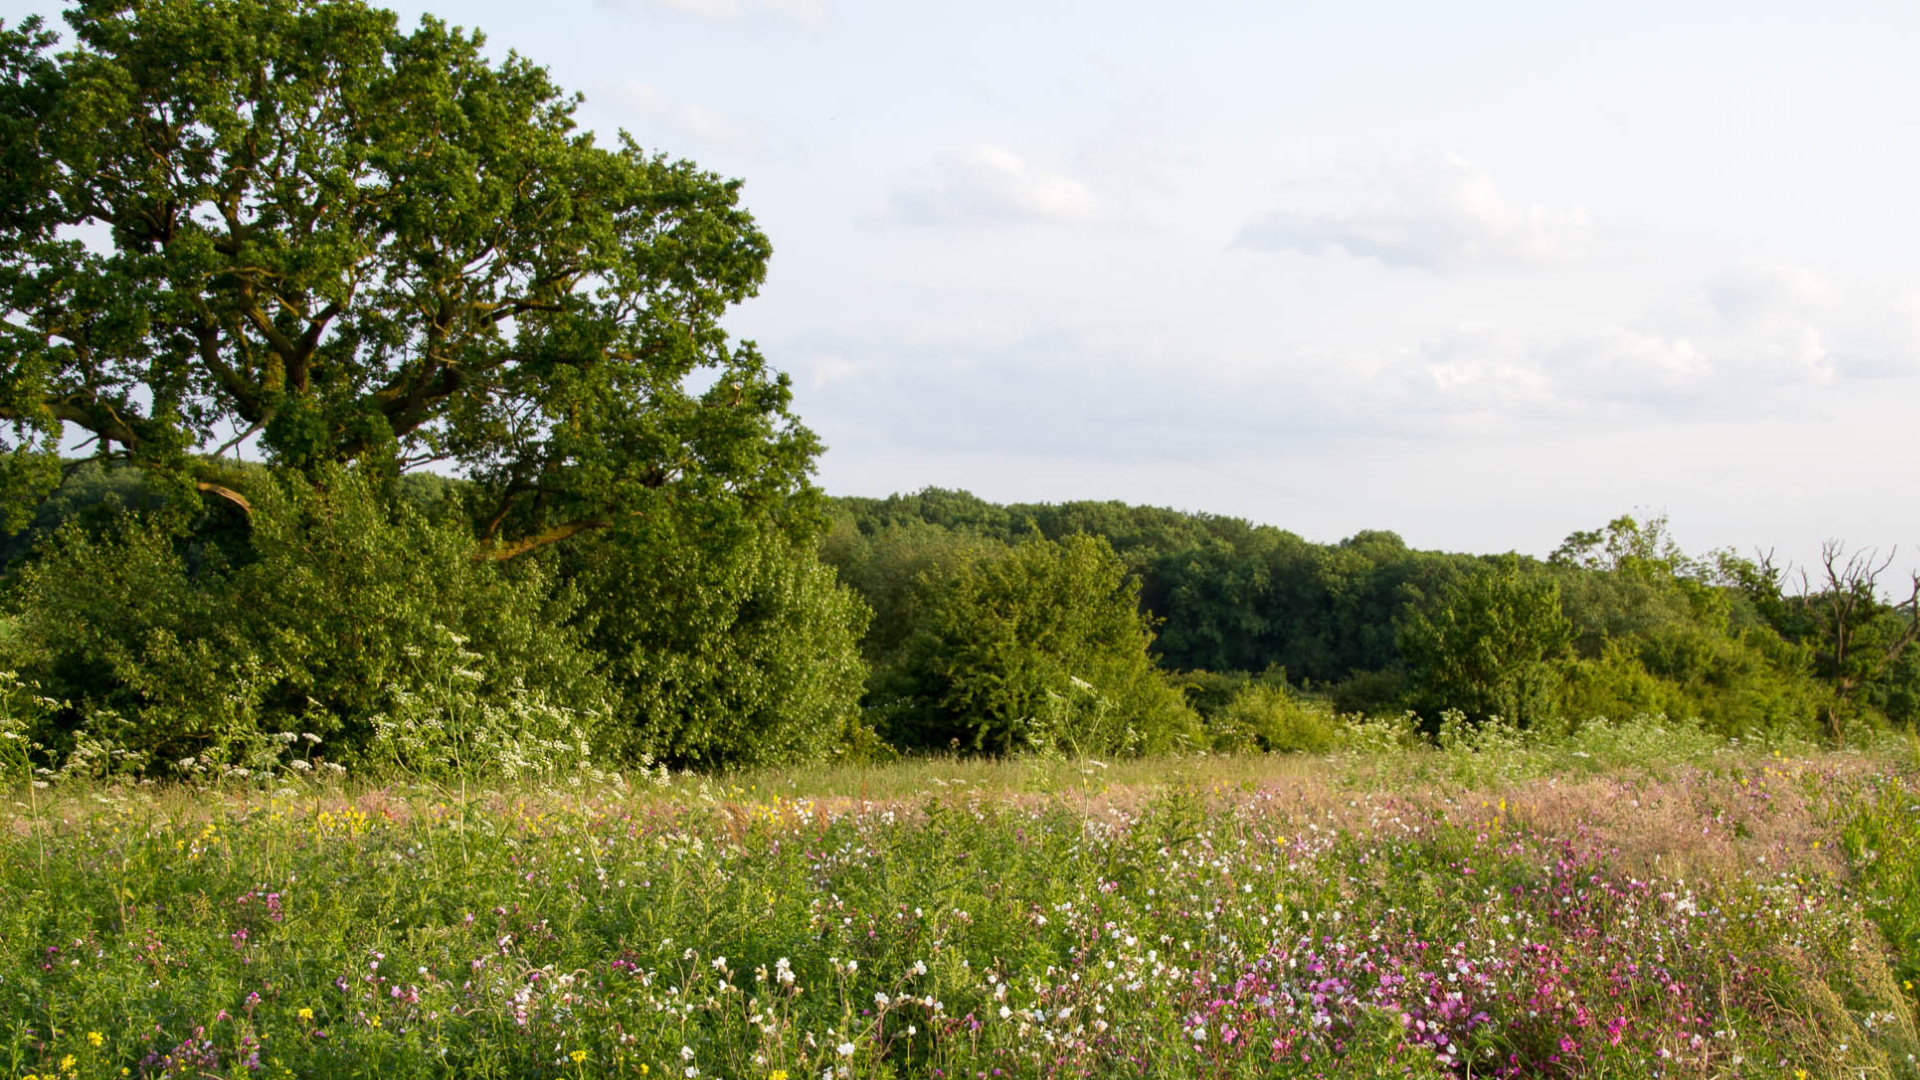 A view of a walking path in Lincolnshire, trees and flowers growing in the foreground